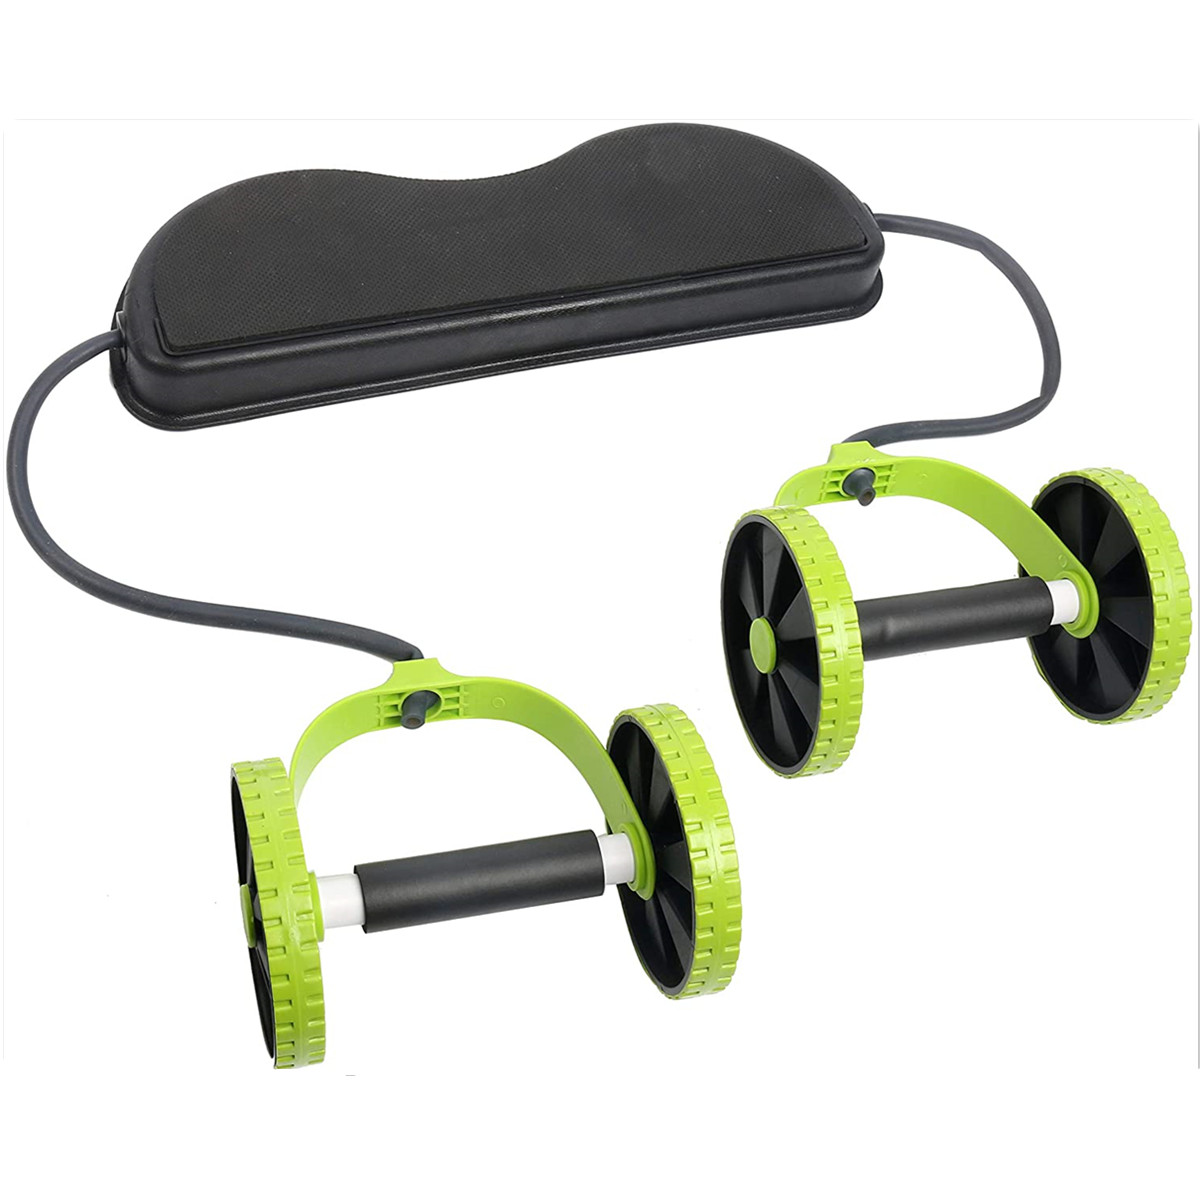 Abs-Exercise-Wheels-Roller-Stretch-Elastic-Abdominal-Pull-Rope-Abdominal-Muscle-Trainer-Home-Fitness-1711821-3